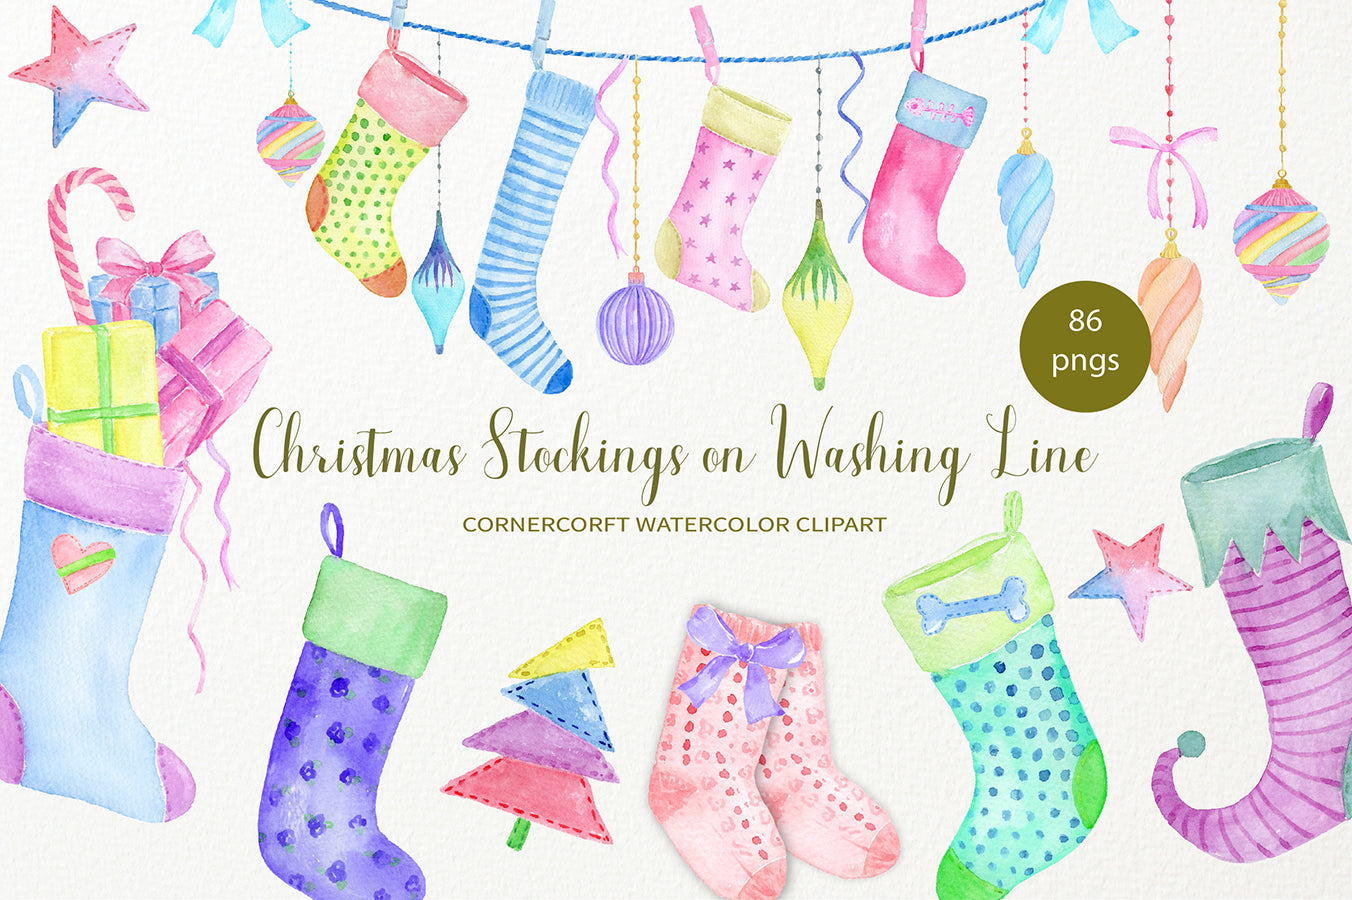 Watercolour Baby clip art, new baby socks illustration clipart digital  download, PNG and JPG, scrapbooking clip art commercial use